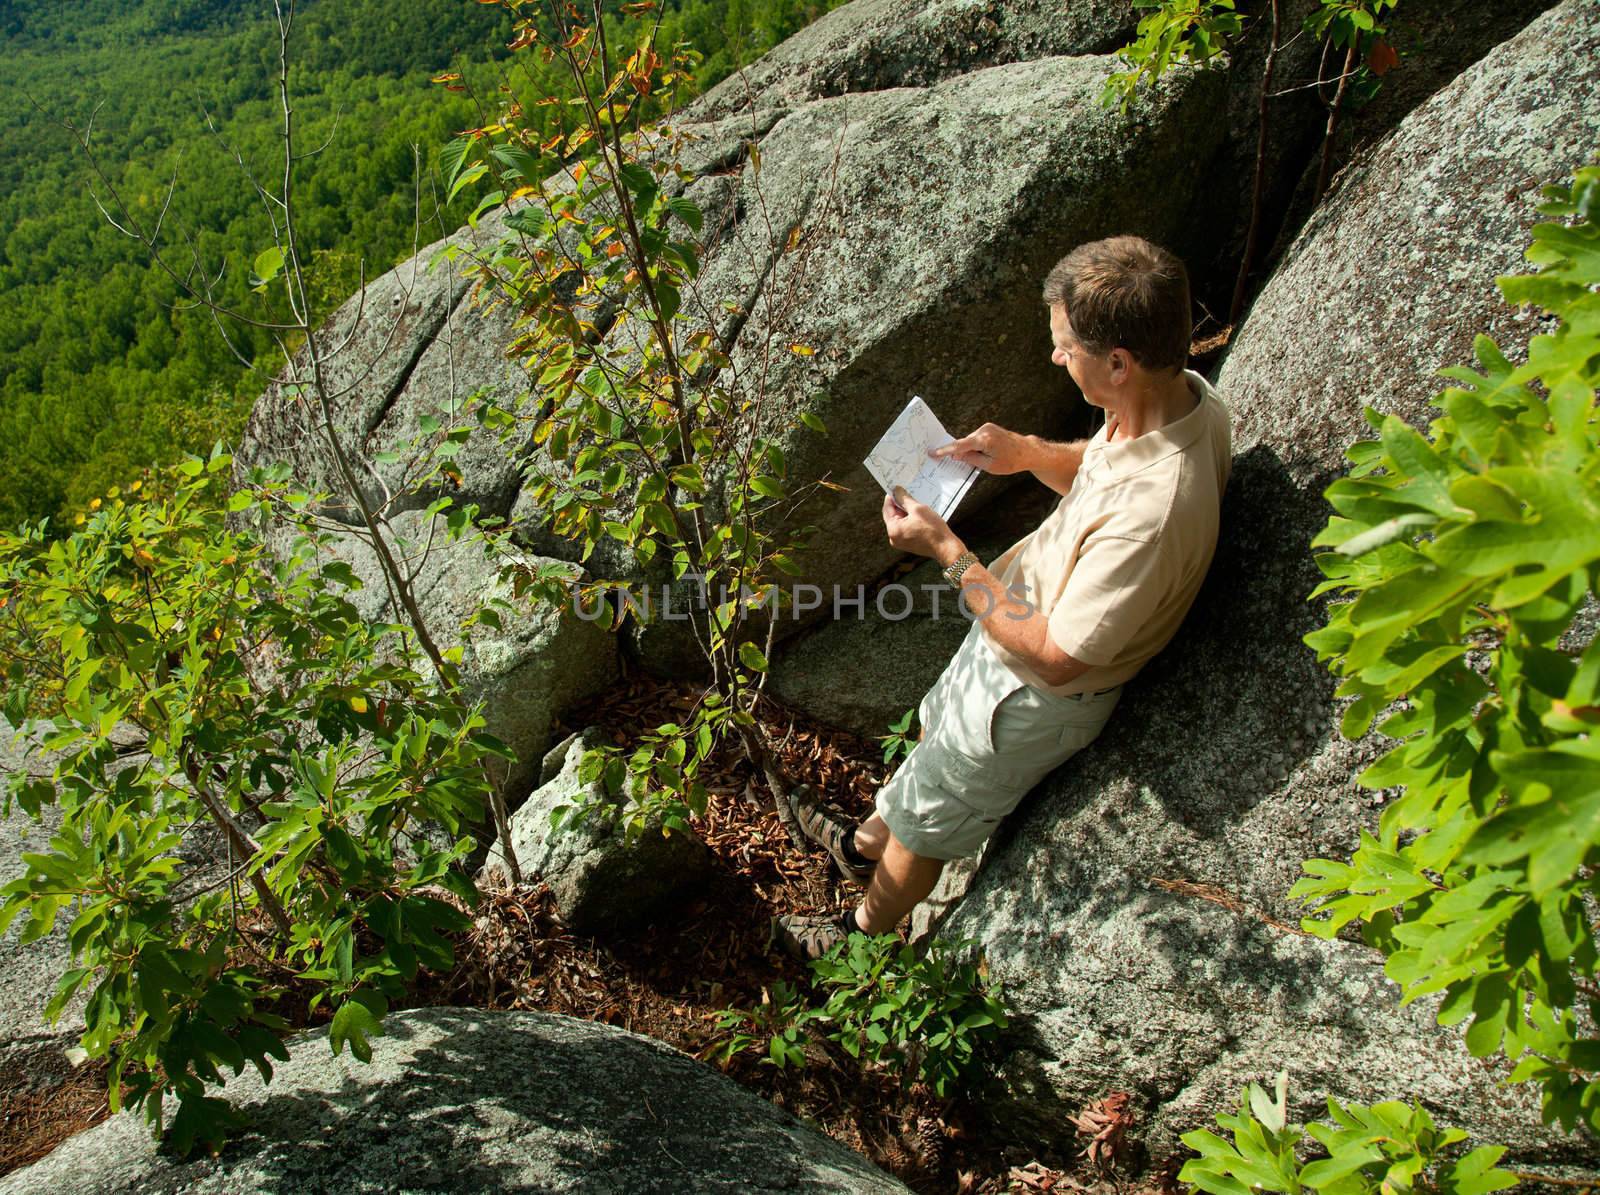 Senior hiker looks at map in the Shenandoah on a climb of Old Rag